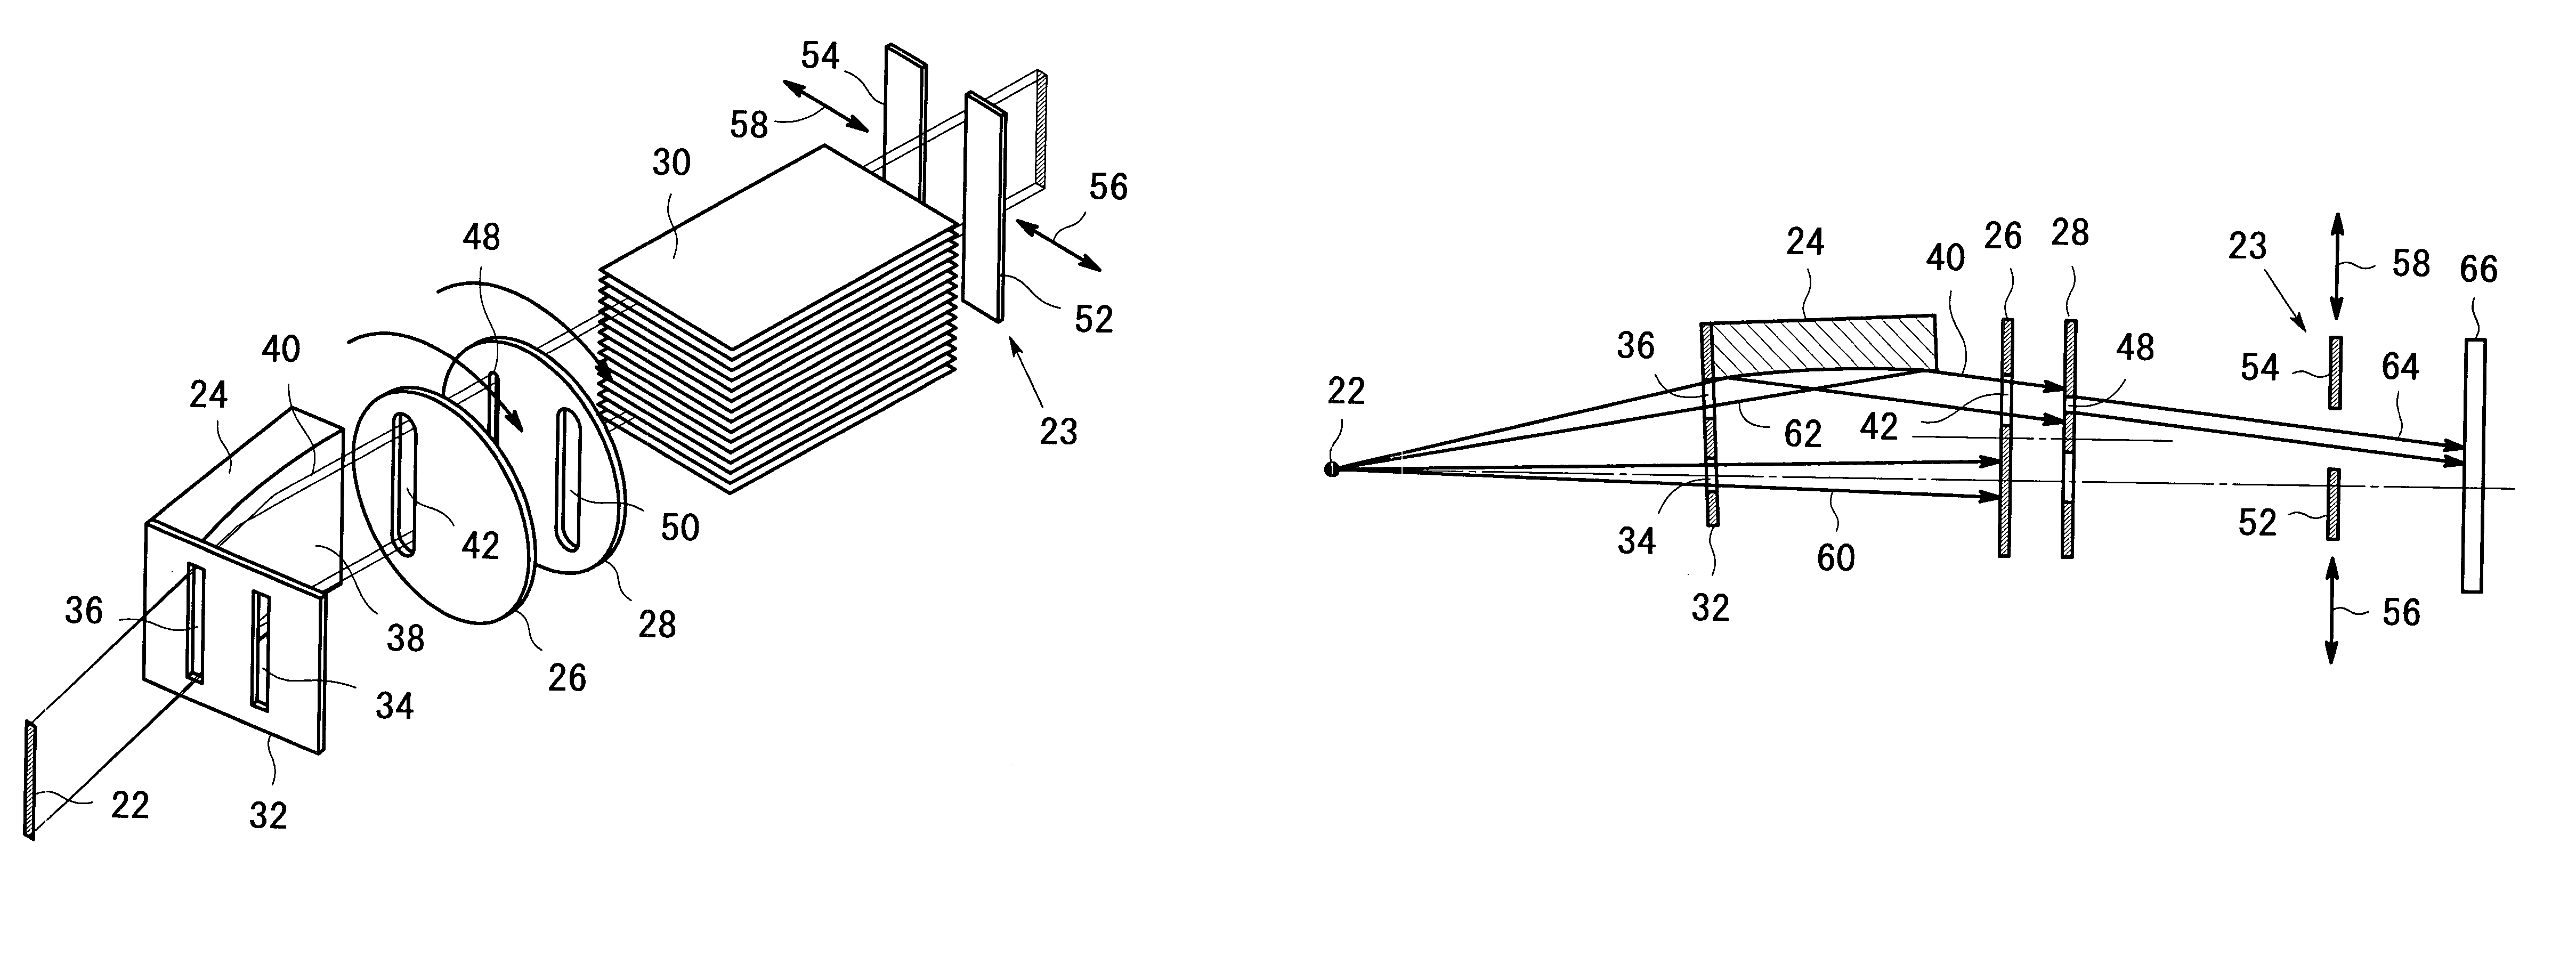 X-ray optical system for small angle scattering